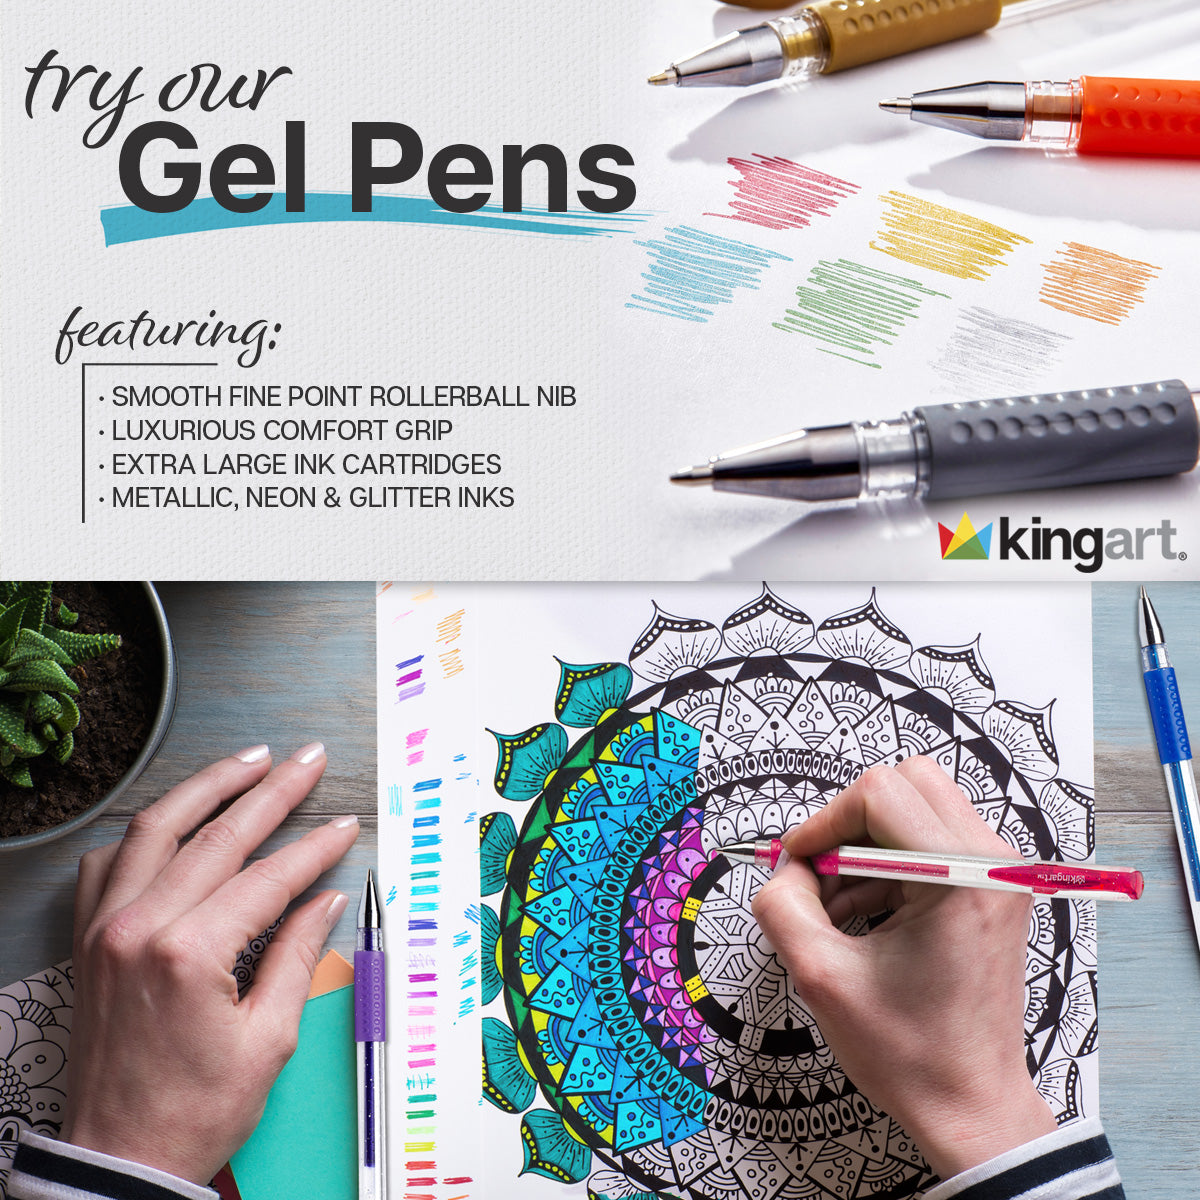 The Best Gel Pens for Art: Unleash Your Creativity with the Right Tools